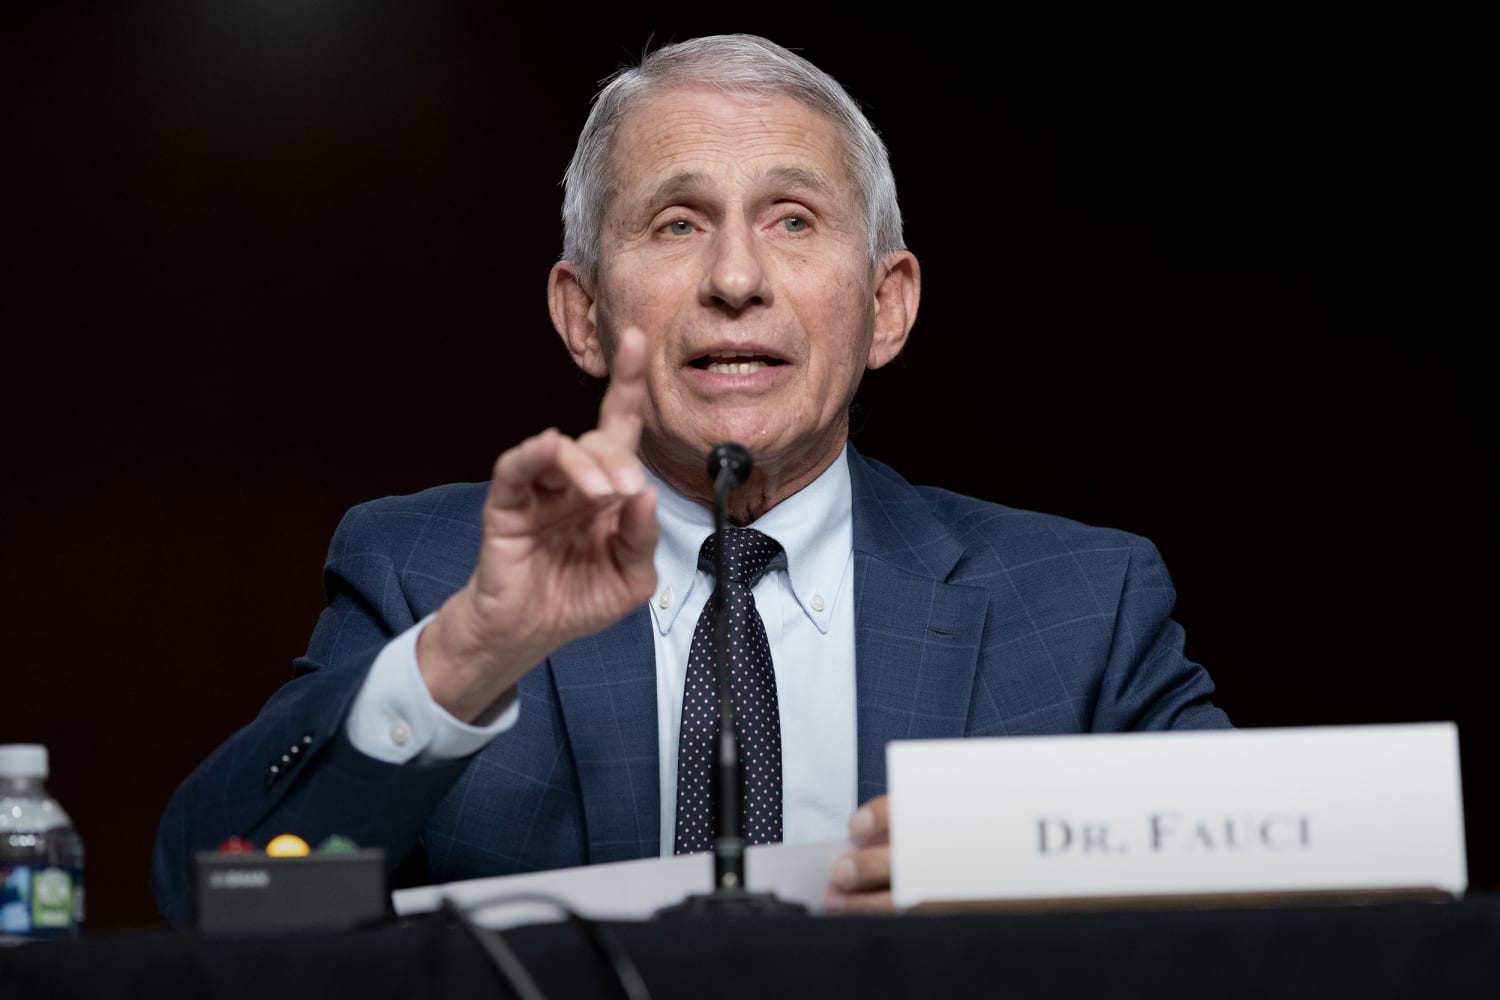 Fauci says Sen. Paul’s attacks ‘kindle the crazies’ who have threatened his life